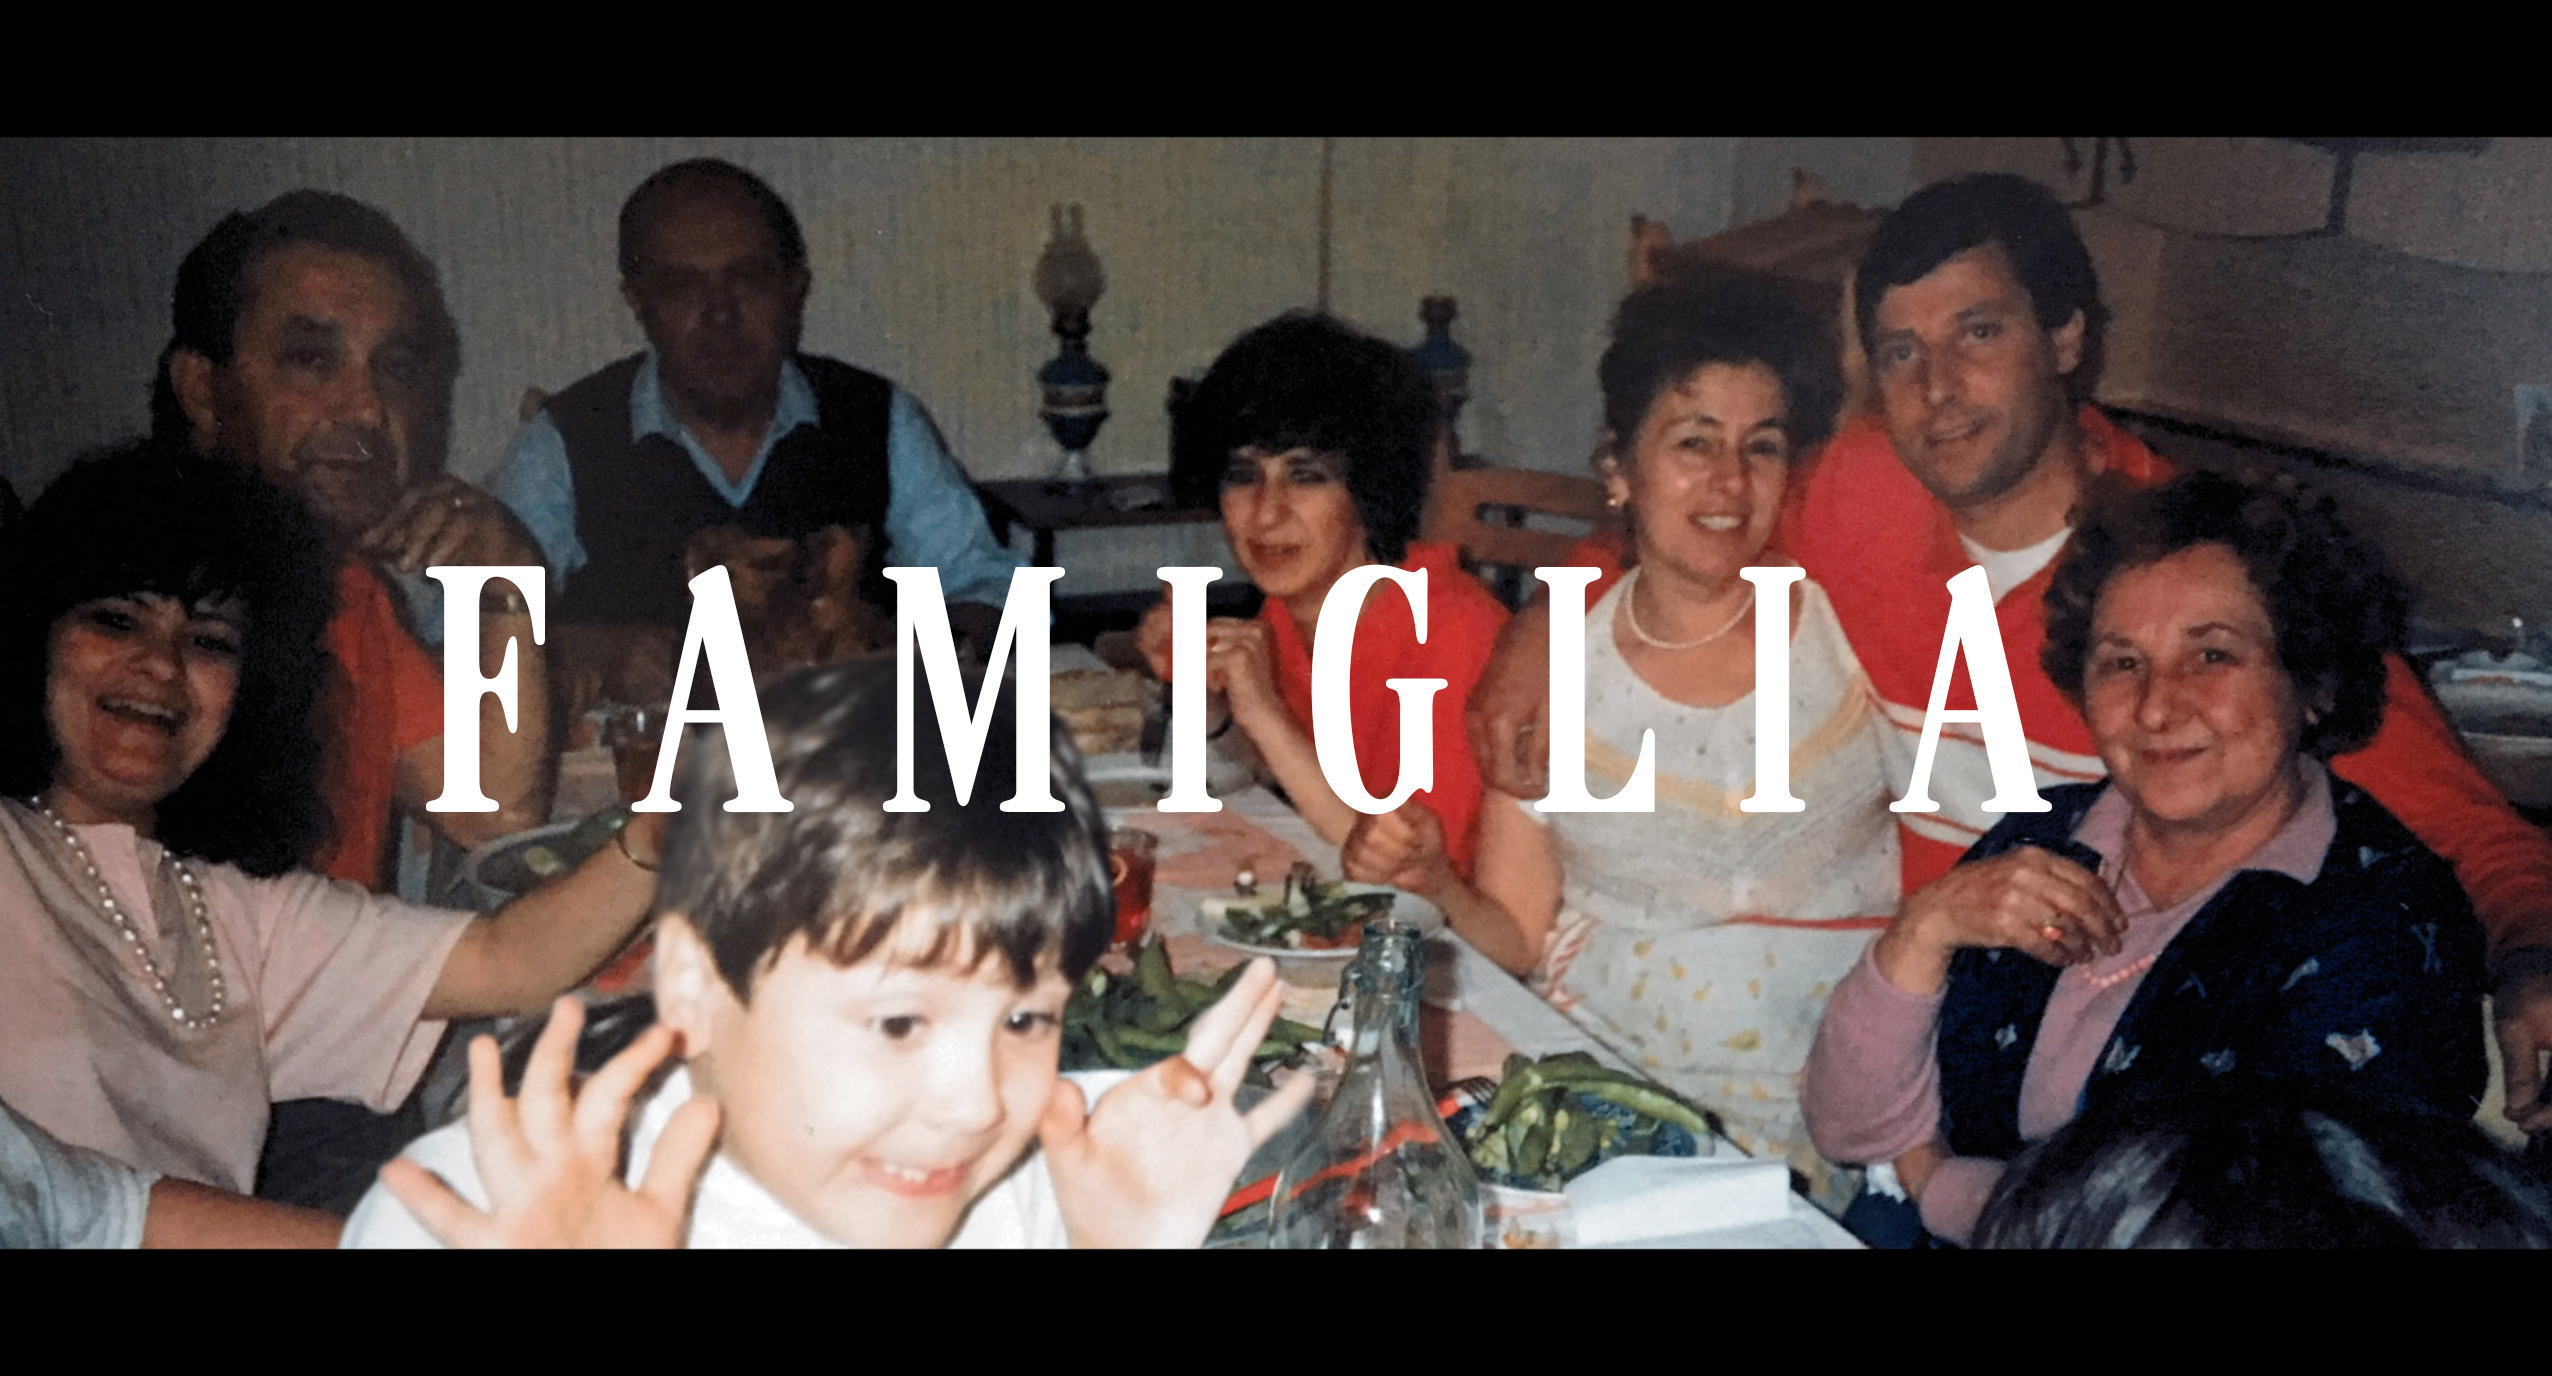 Abigail Ainsworth directs 'Famiglia' - A Short Film on the Baldessarre Family Pasta Business